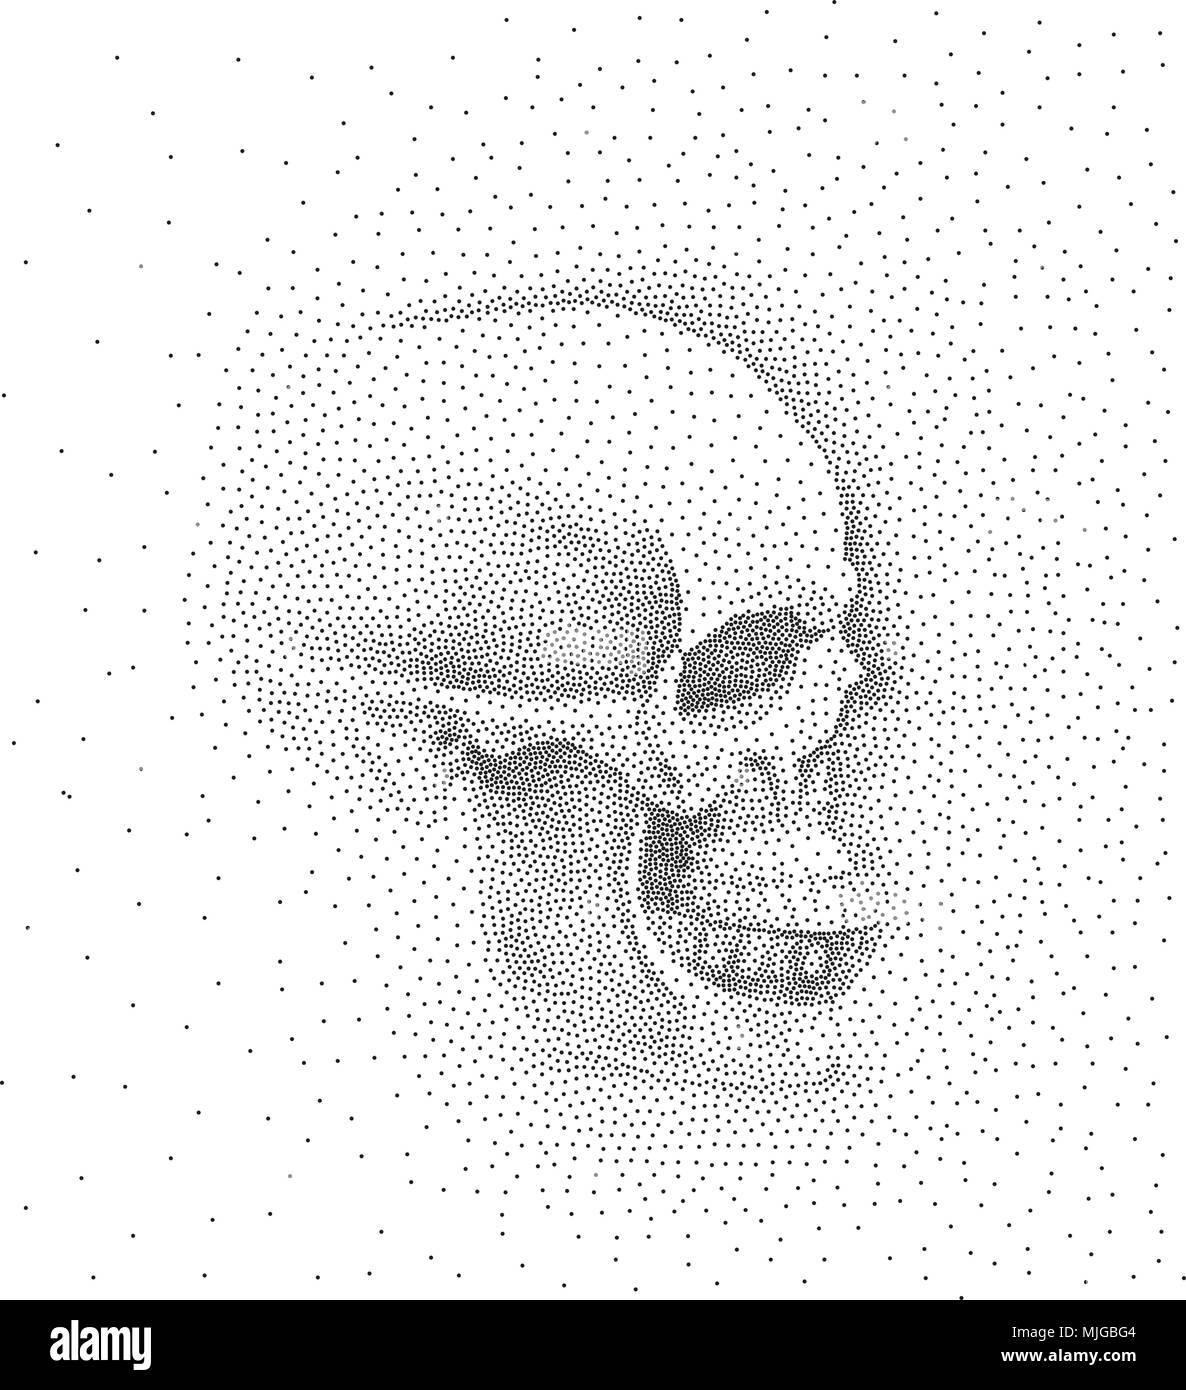 Skull In Profile On White Background Simple Black Points On